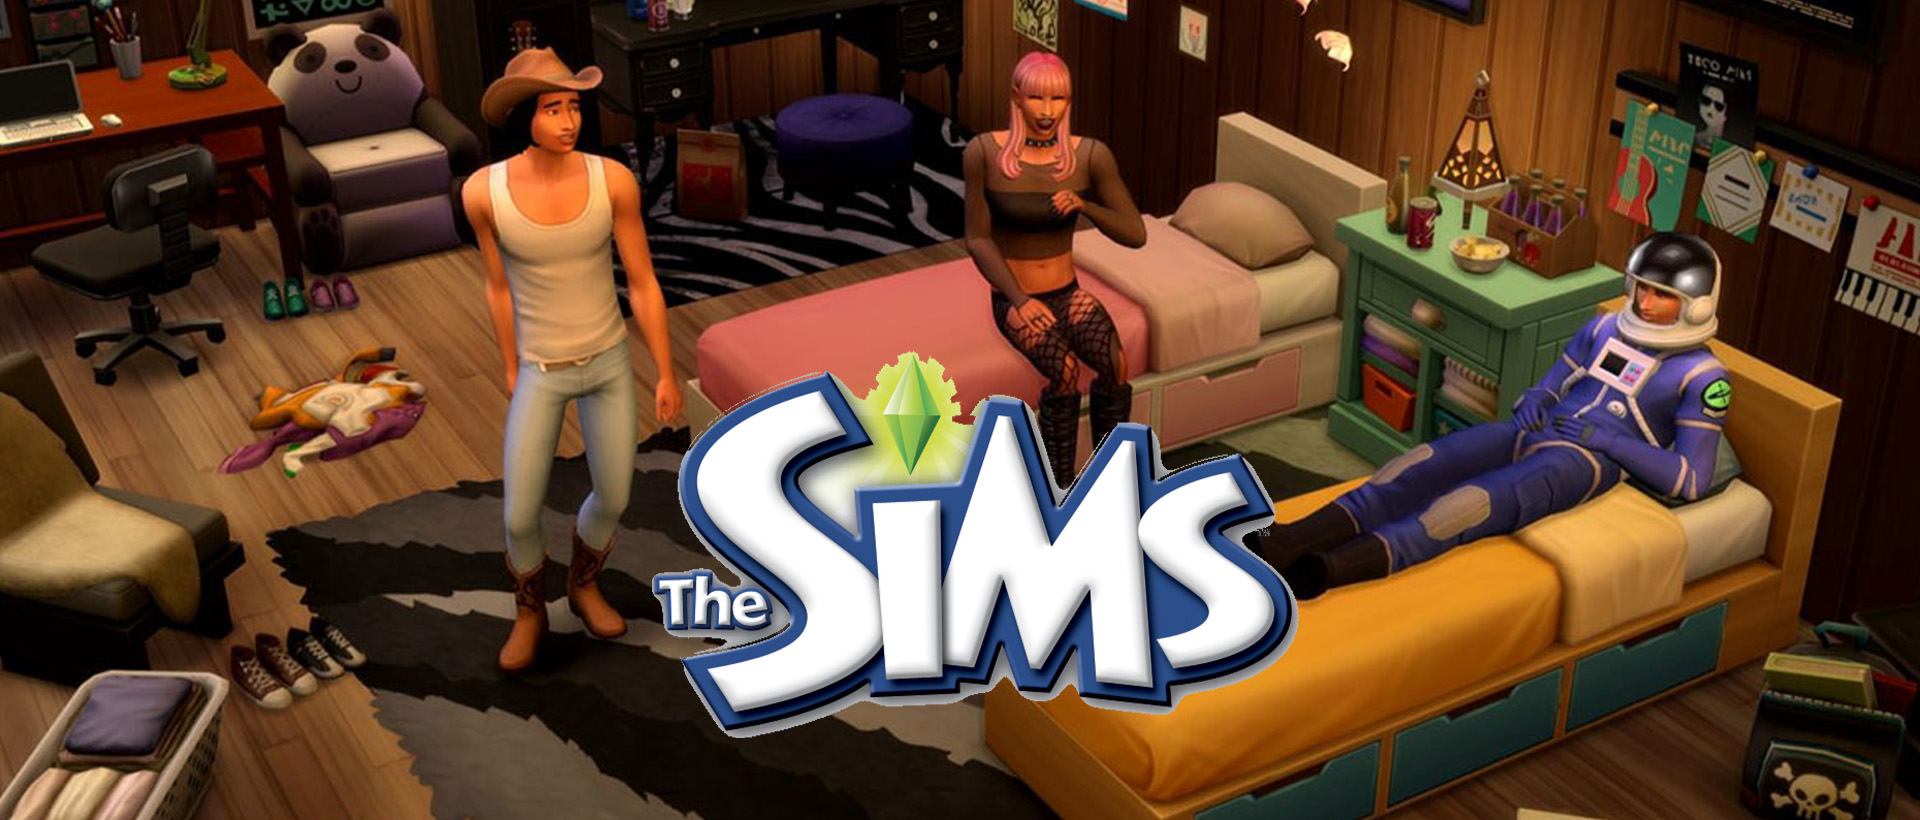 the sims video game banner